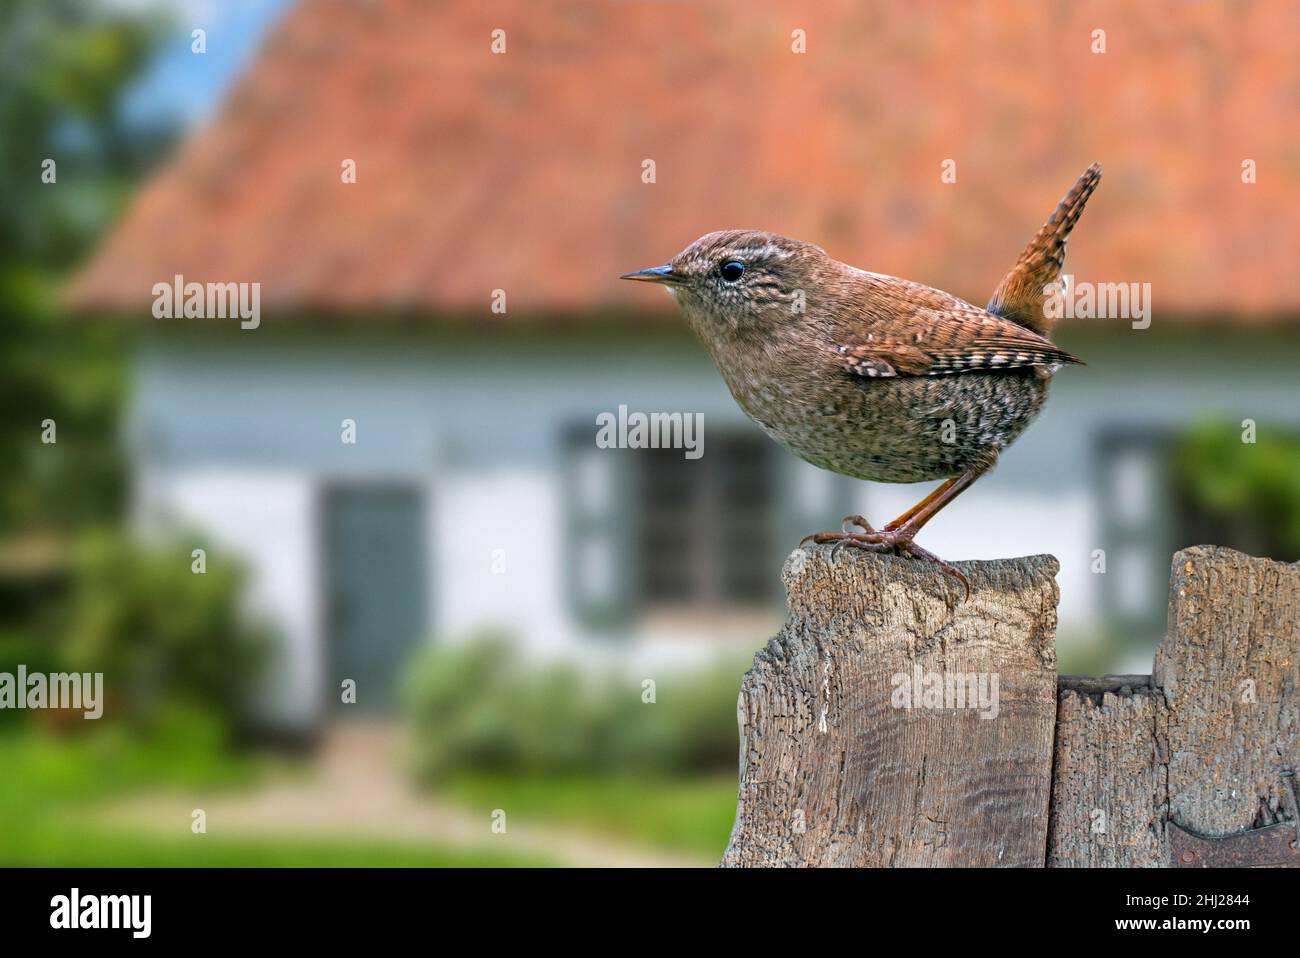 Eurasian wren (Troglodytes troglodytes / Nannus troglodytes) perched on old weathered wooden garden fence of house in the countryside Stock Photo